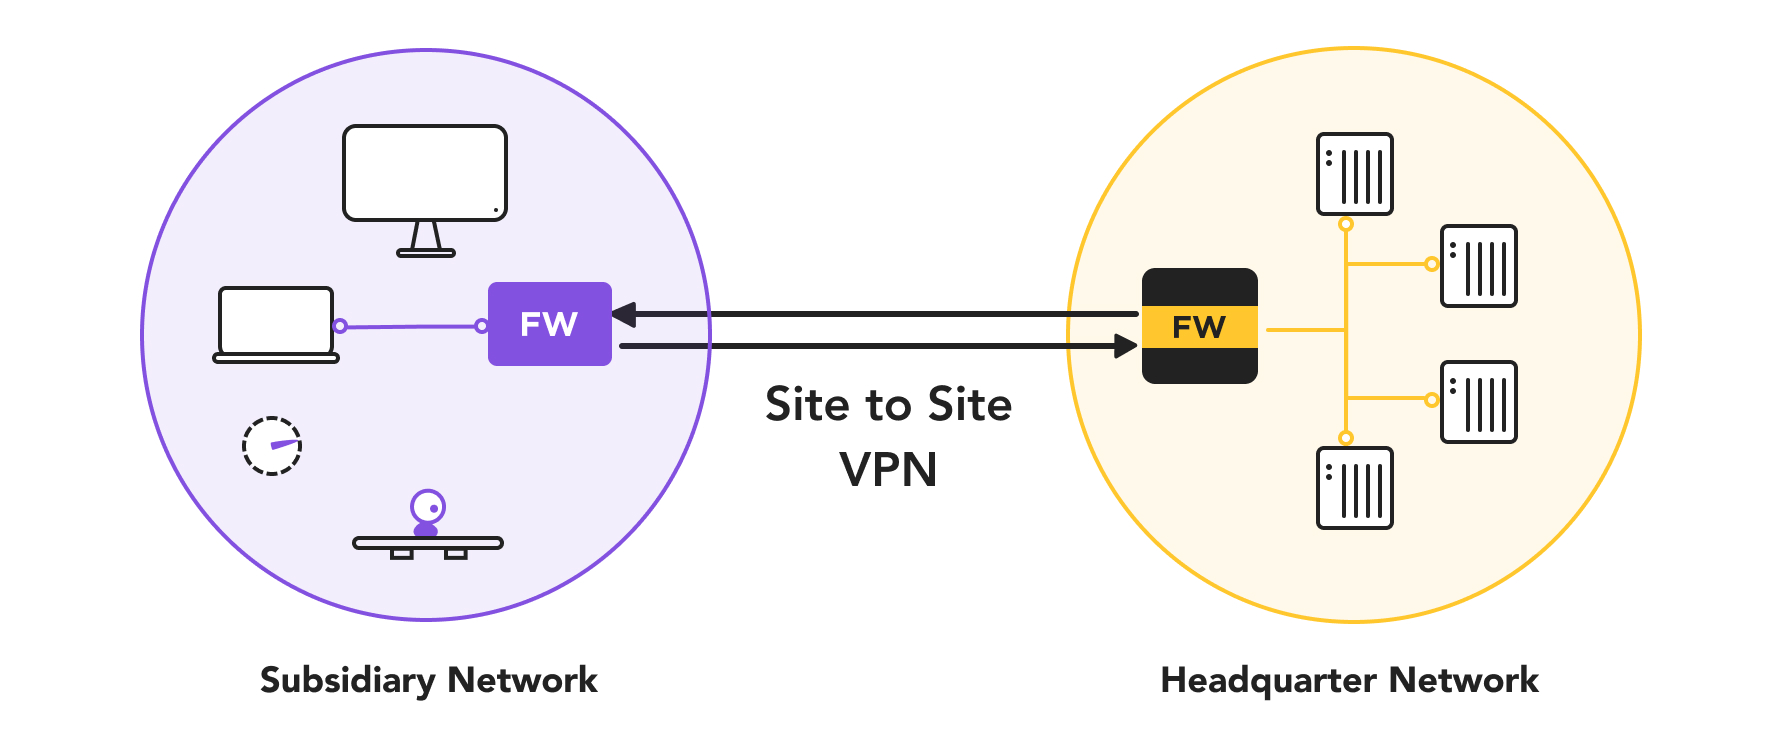 Site to Site VPN established with Purple and Gold Plus Firewalla routers, such as a client-side network and a server-side network.